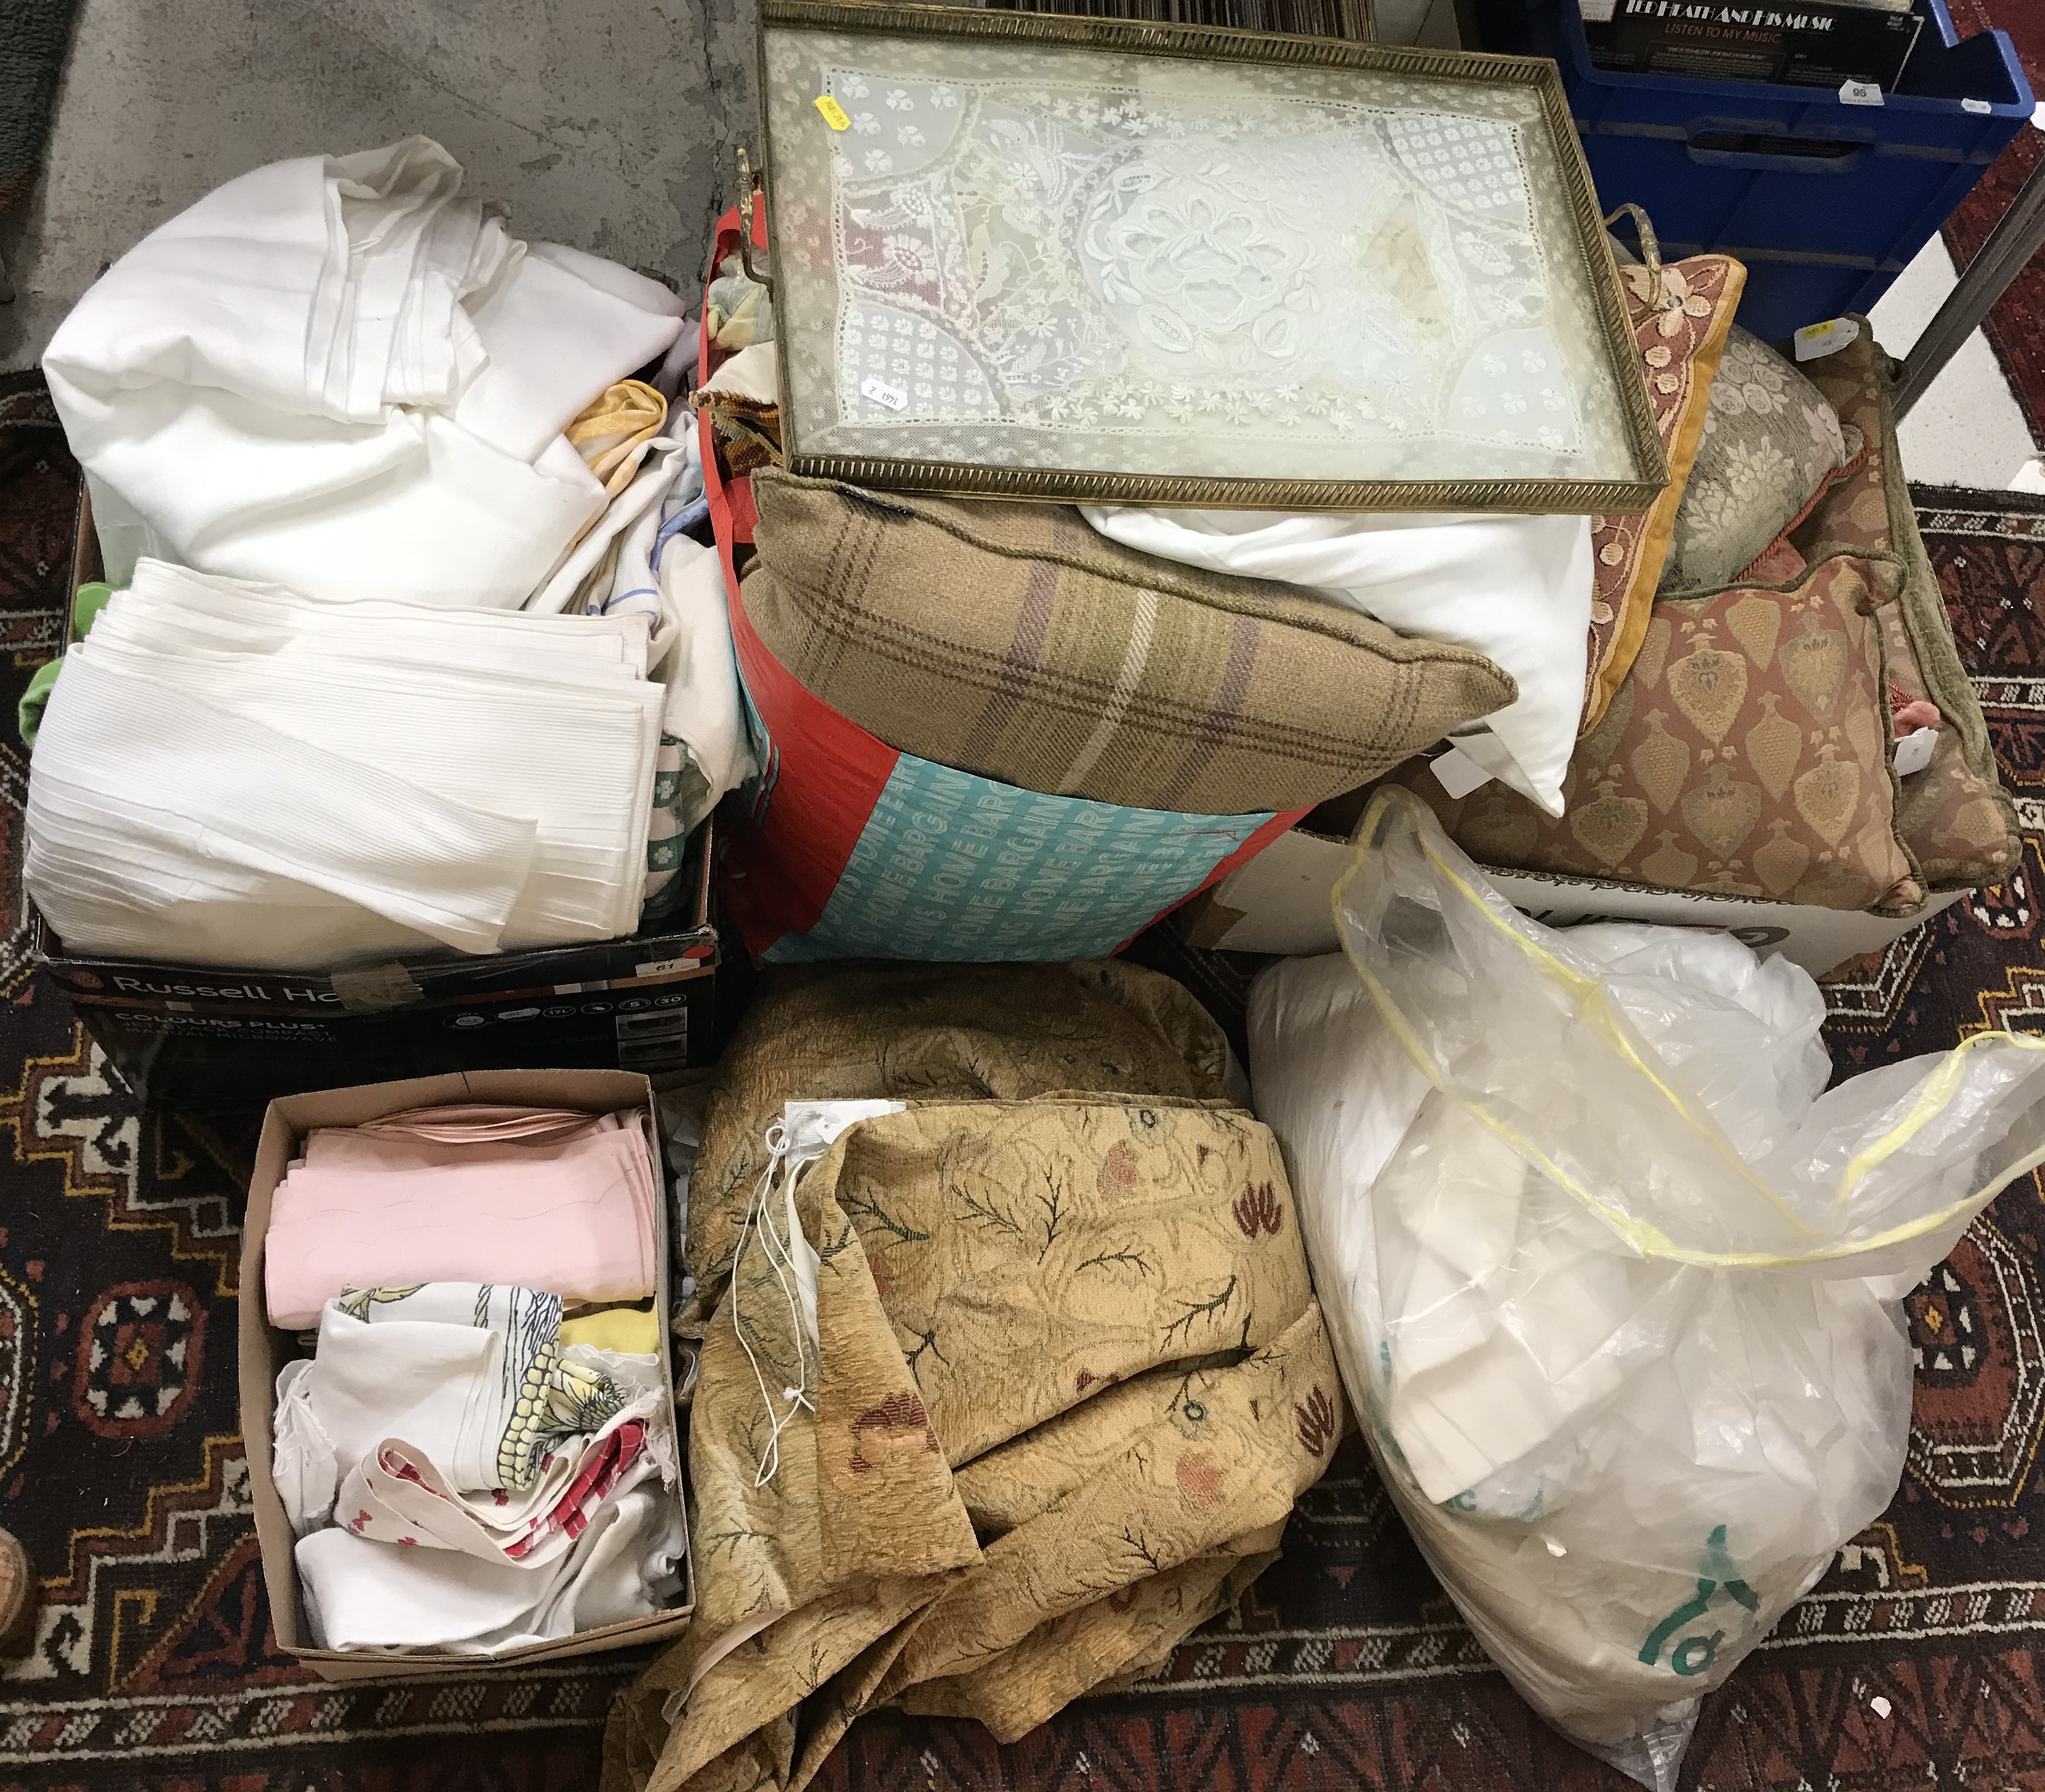 A box containing various household table linens etc to include cotton tablecloths,